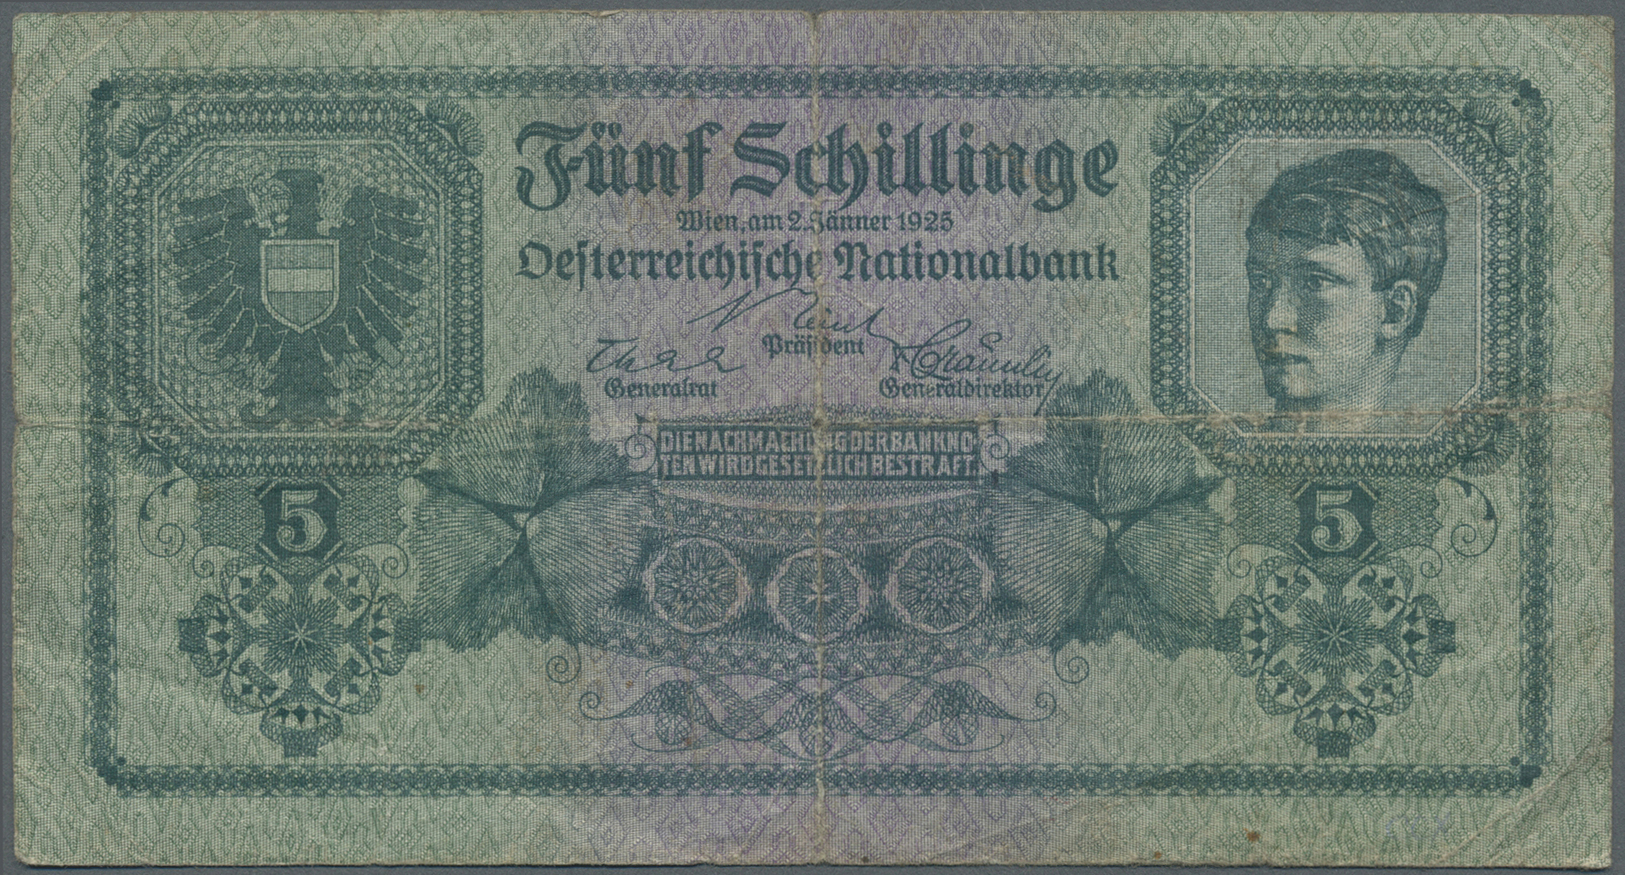 00182 Austria / Österreich: 5 Schillinge 1925 P. 88, Used With Very Strong Folds In Paper, Several Small Holes, No Repai - Austria